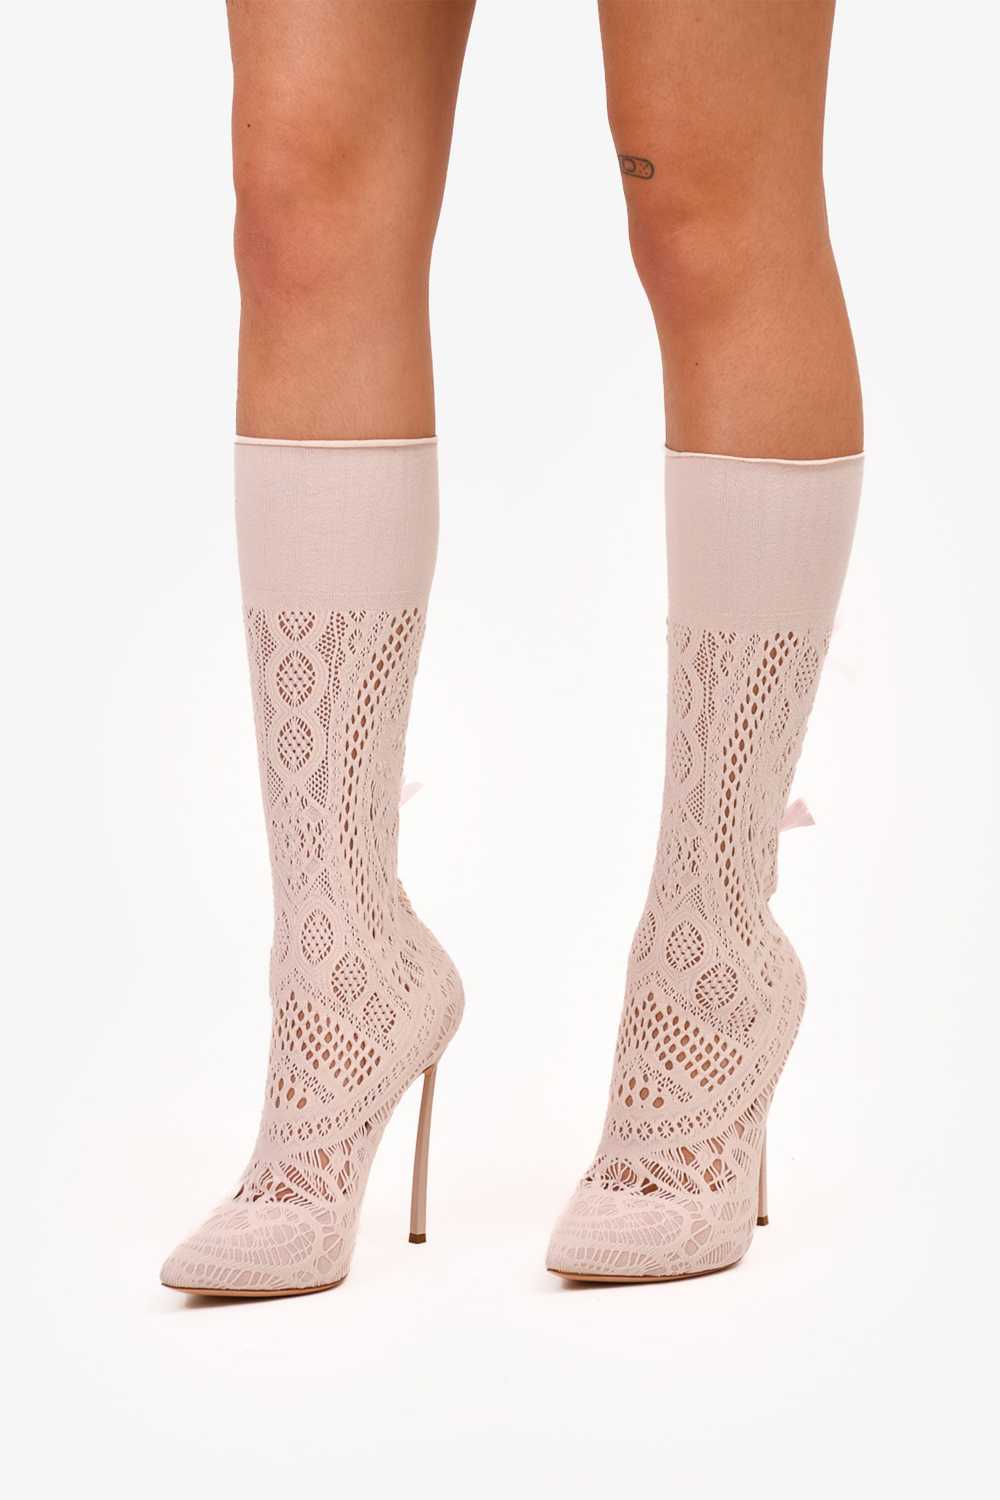 Casadei Pink Ribbon Detailed Sock Style Ankle Boo… - image 4